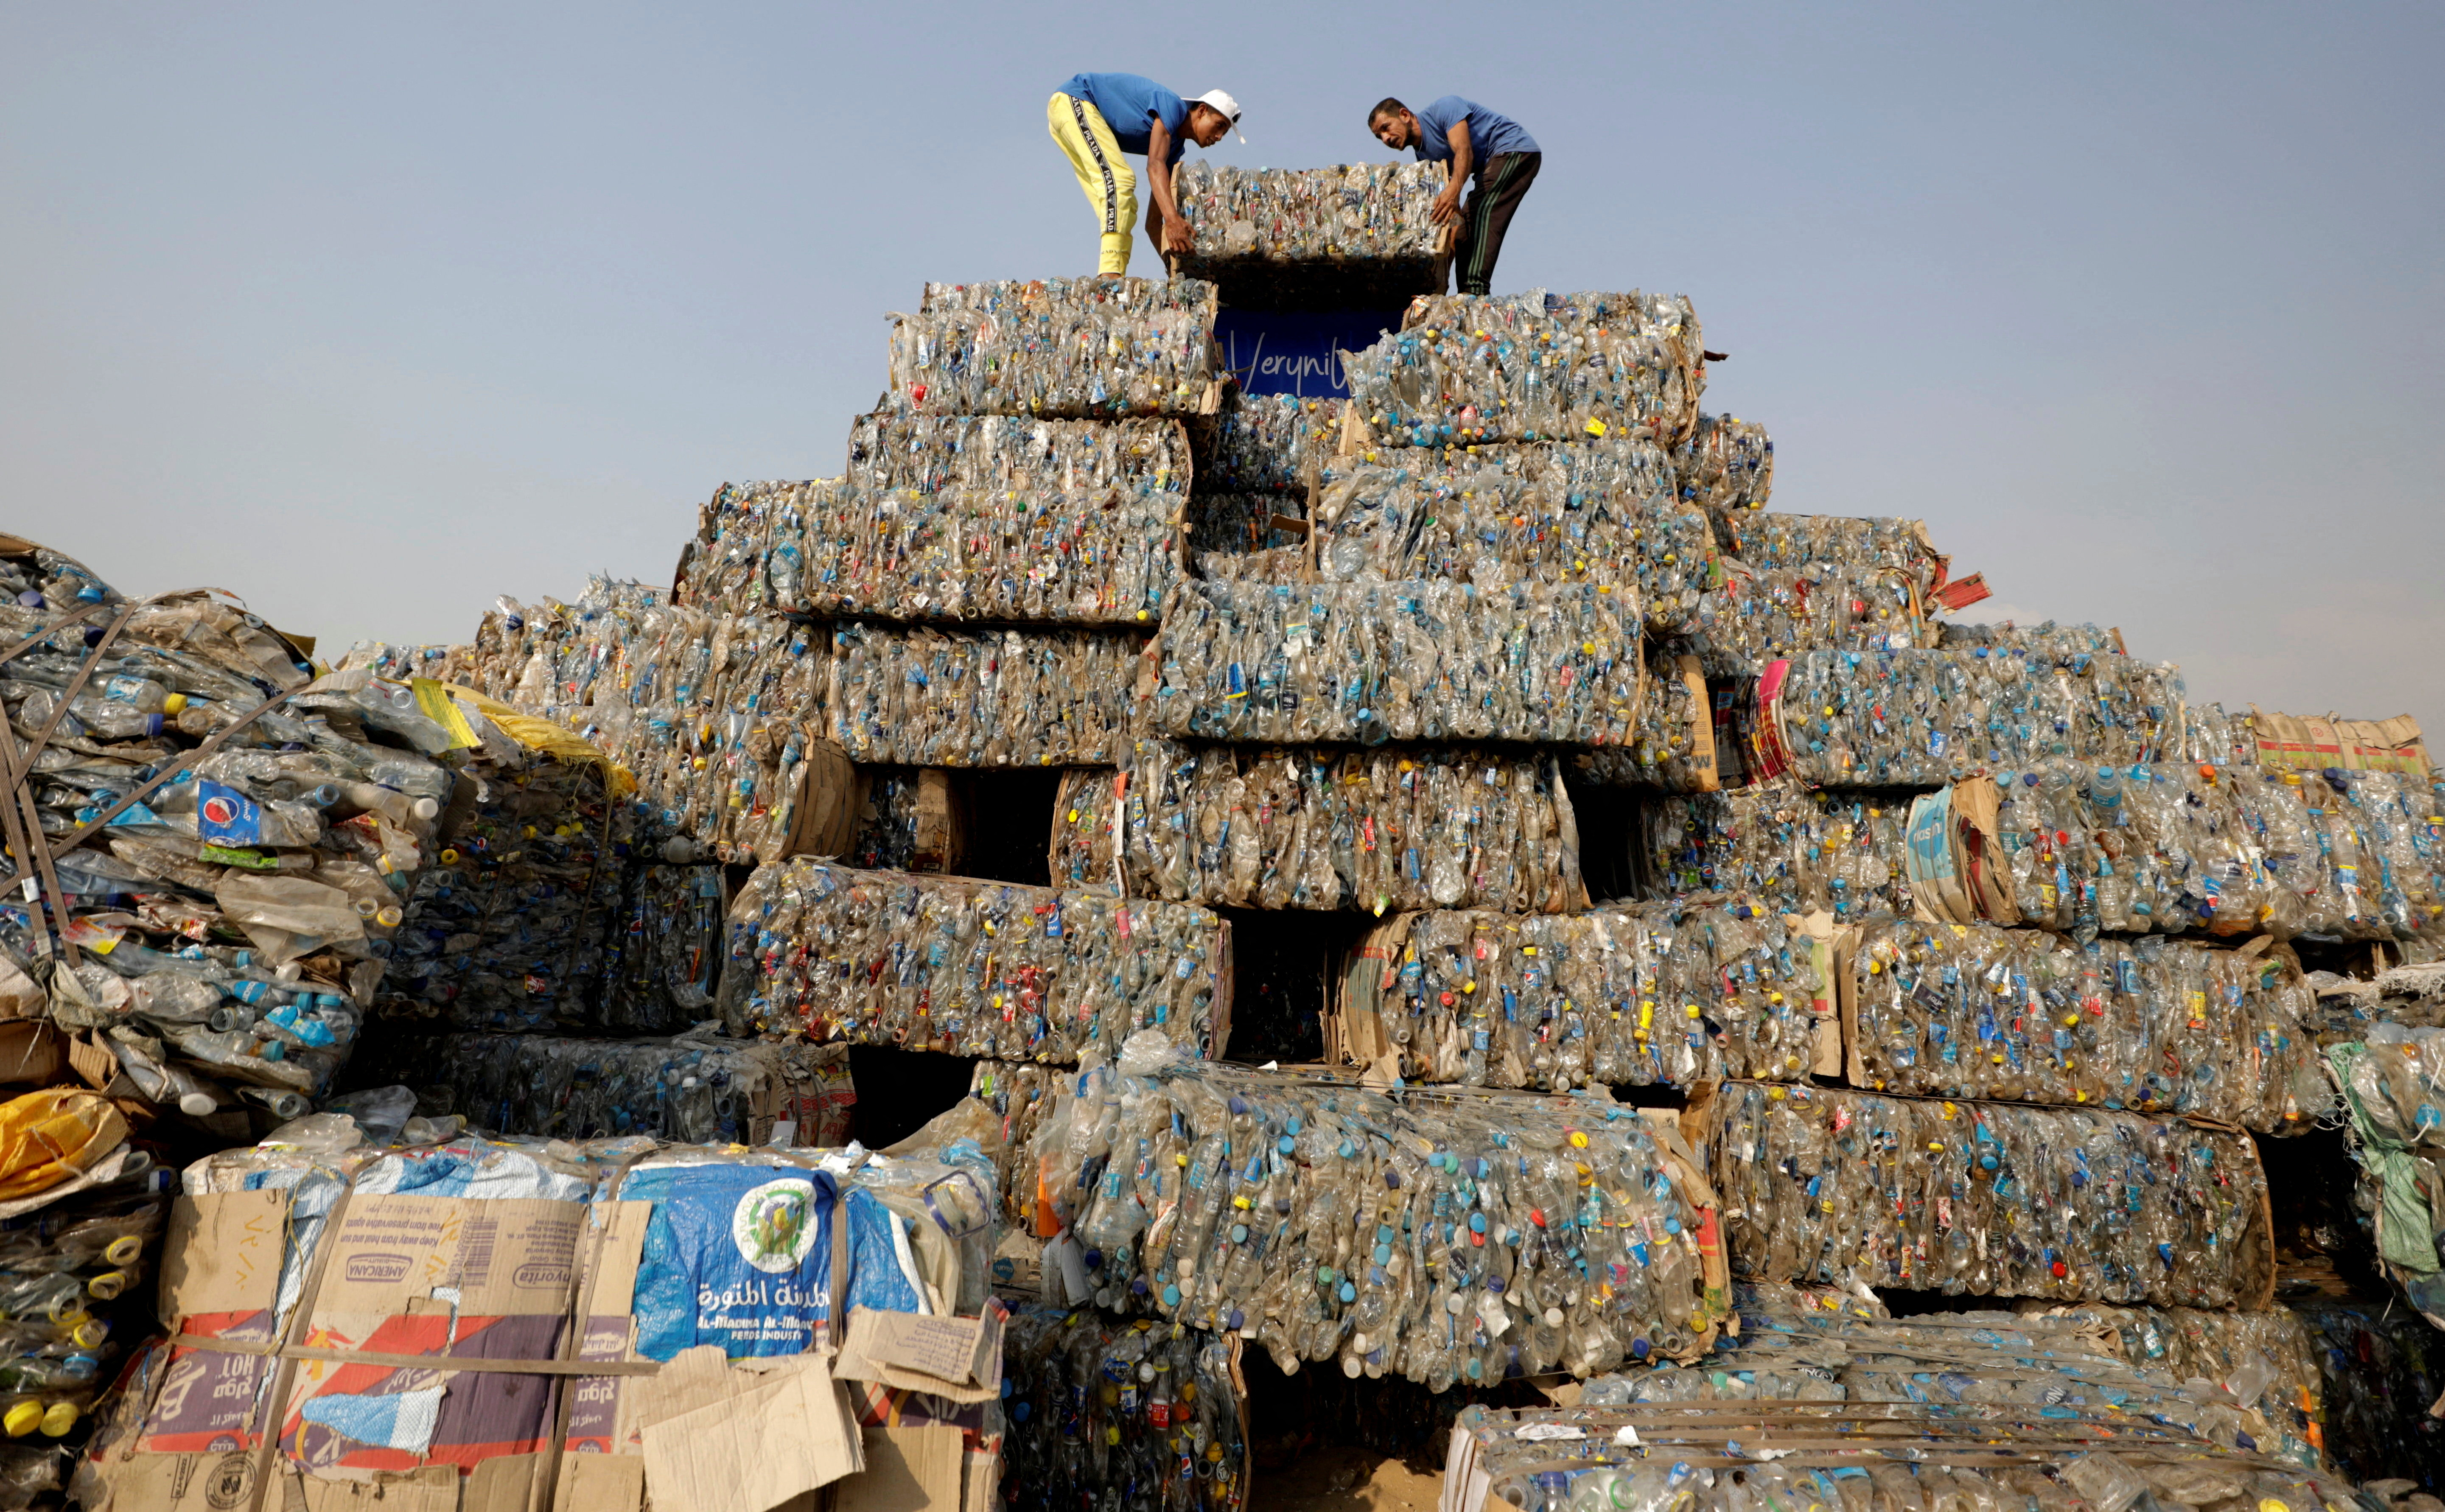 The largest plastic pyramid in the world, Plastic Pyramid for The VeryNile NGO, in Giza